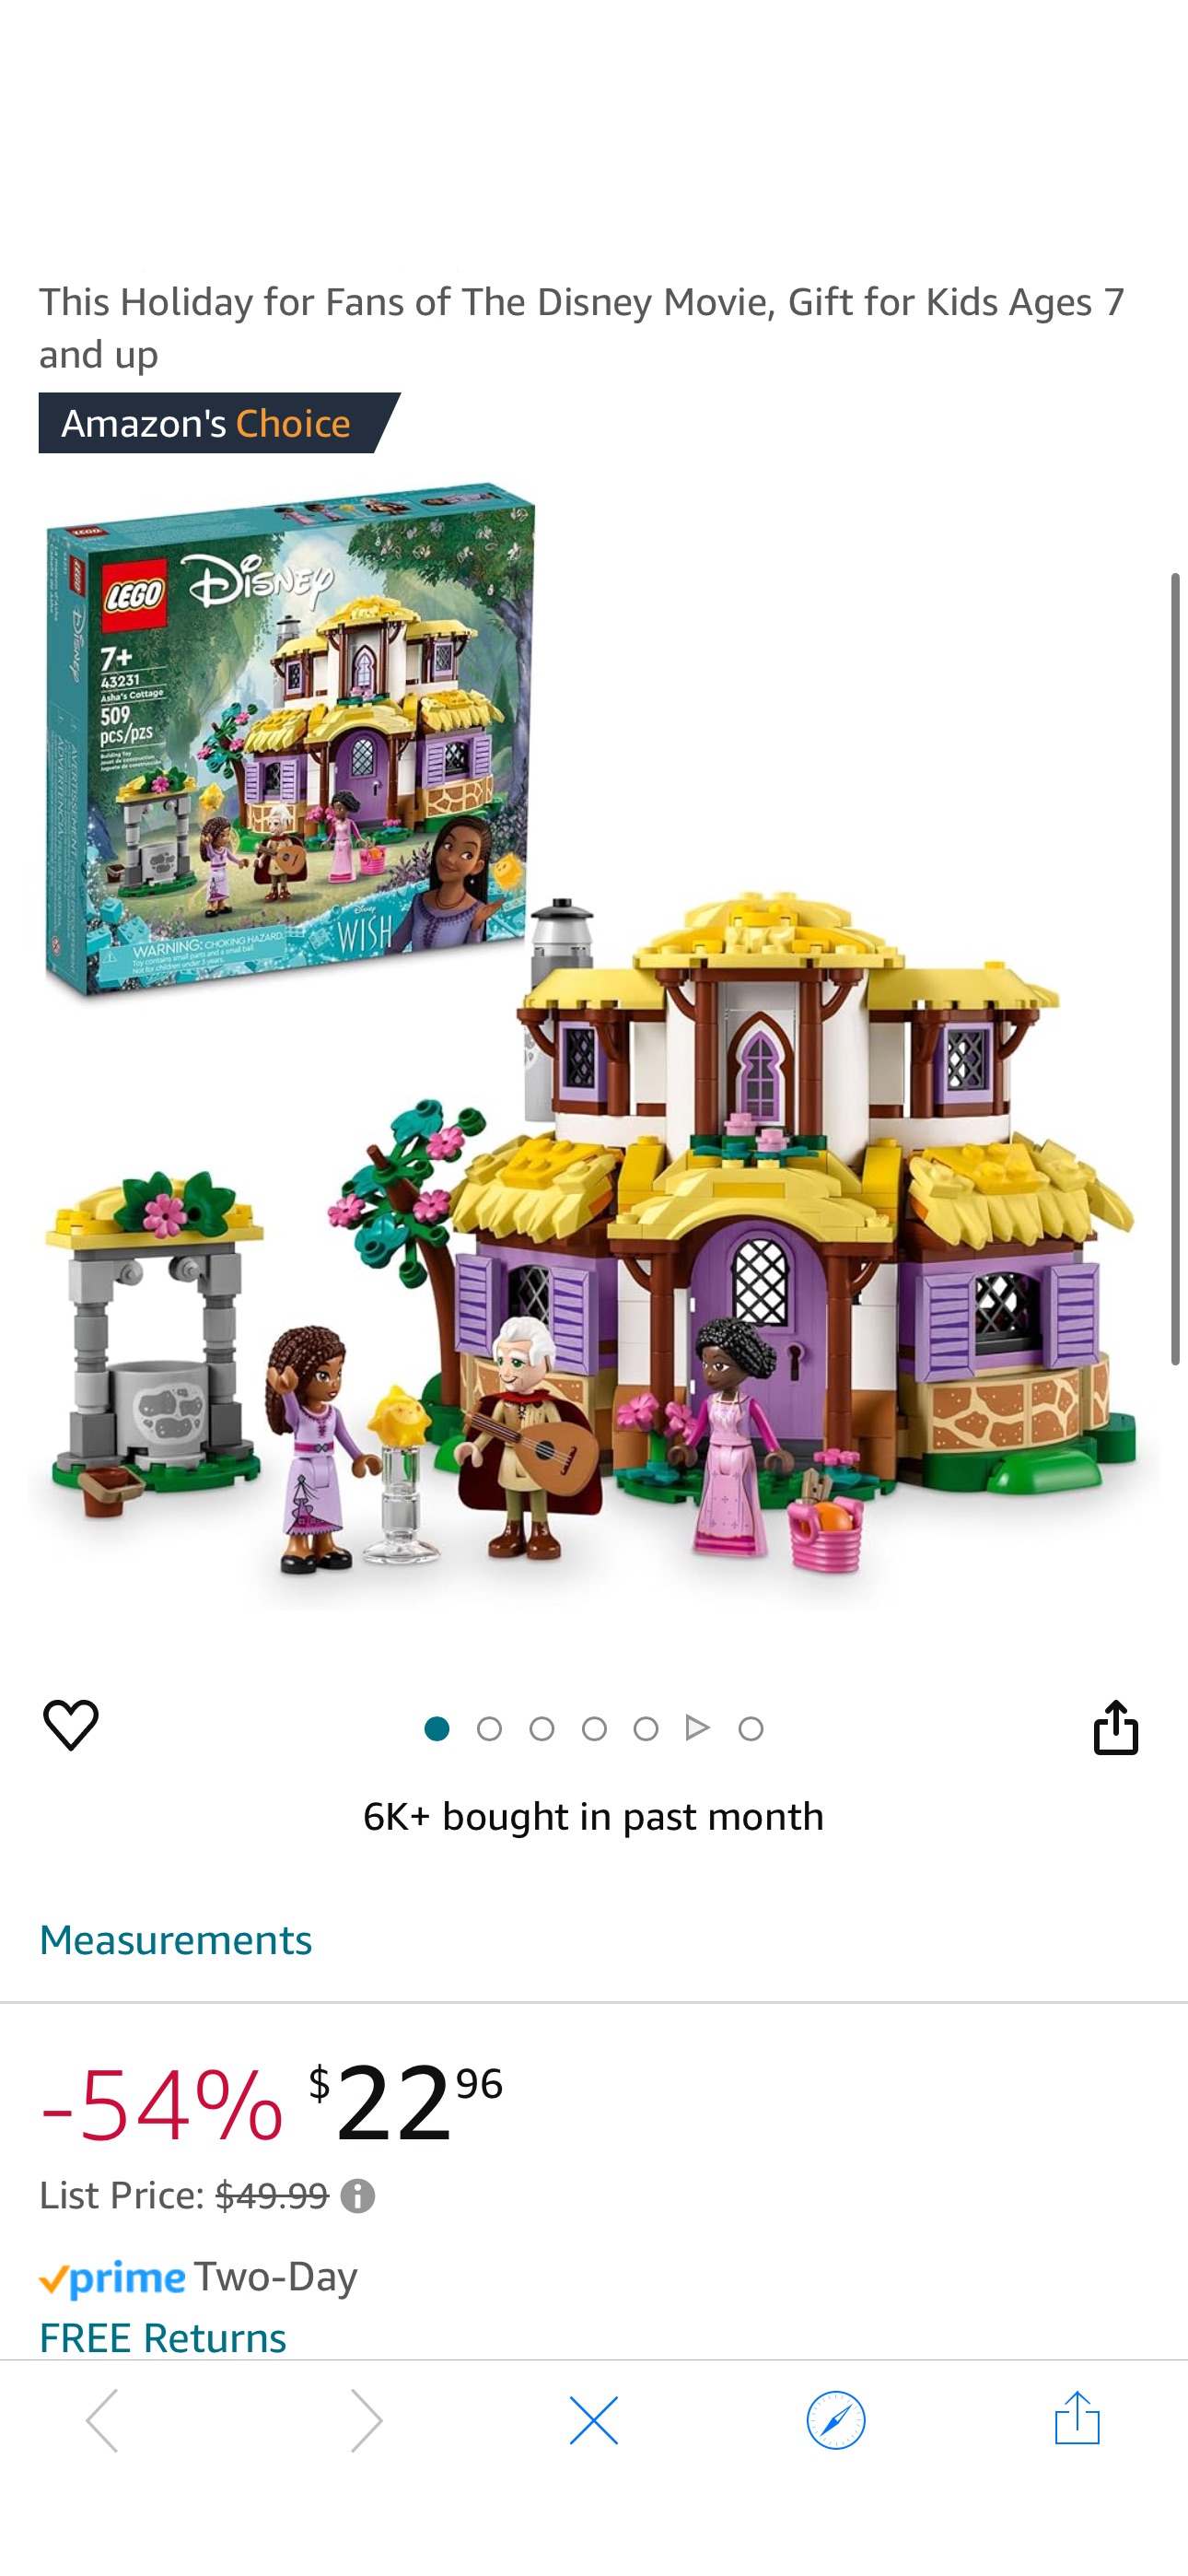 Amazon.com: LEGO Disney Wish: Asha’s Cottage 43231 Building Toy Set, A Cottage for Role-Playing Life in The Hamlet, Collectible Gift This Holiday for Fans of The Disney Movie, Gift for Kids Ages 7 and